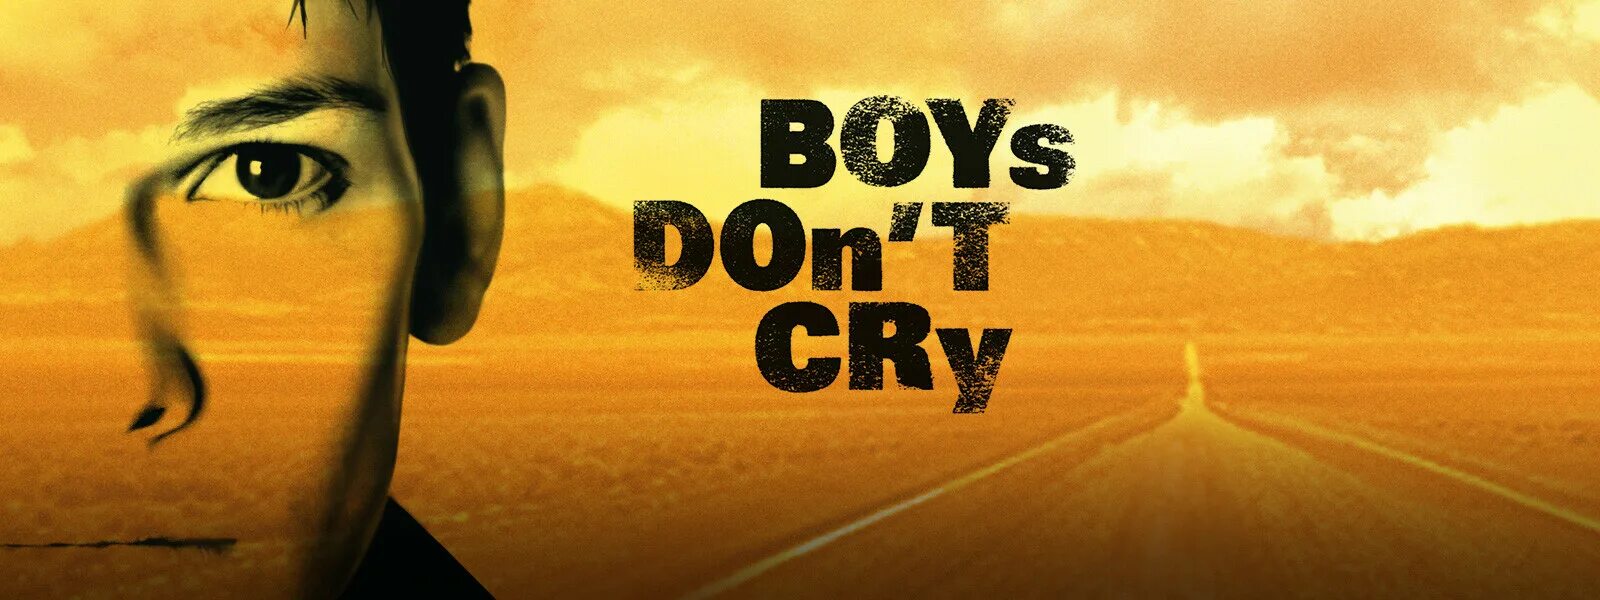 Boys dont. Boys don`t Cry. Обложка альбома boys don't Cry. Бойс донт край Гон. Гон флад boys don't Cry.